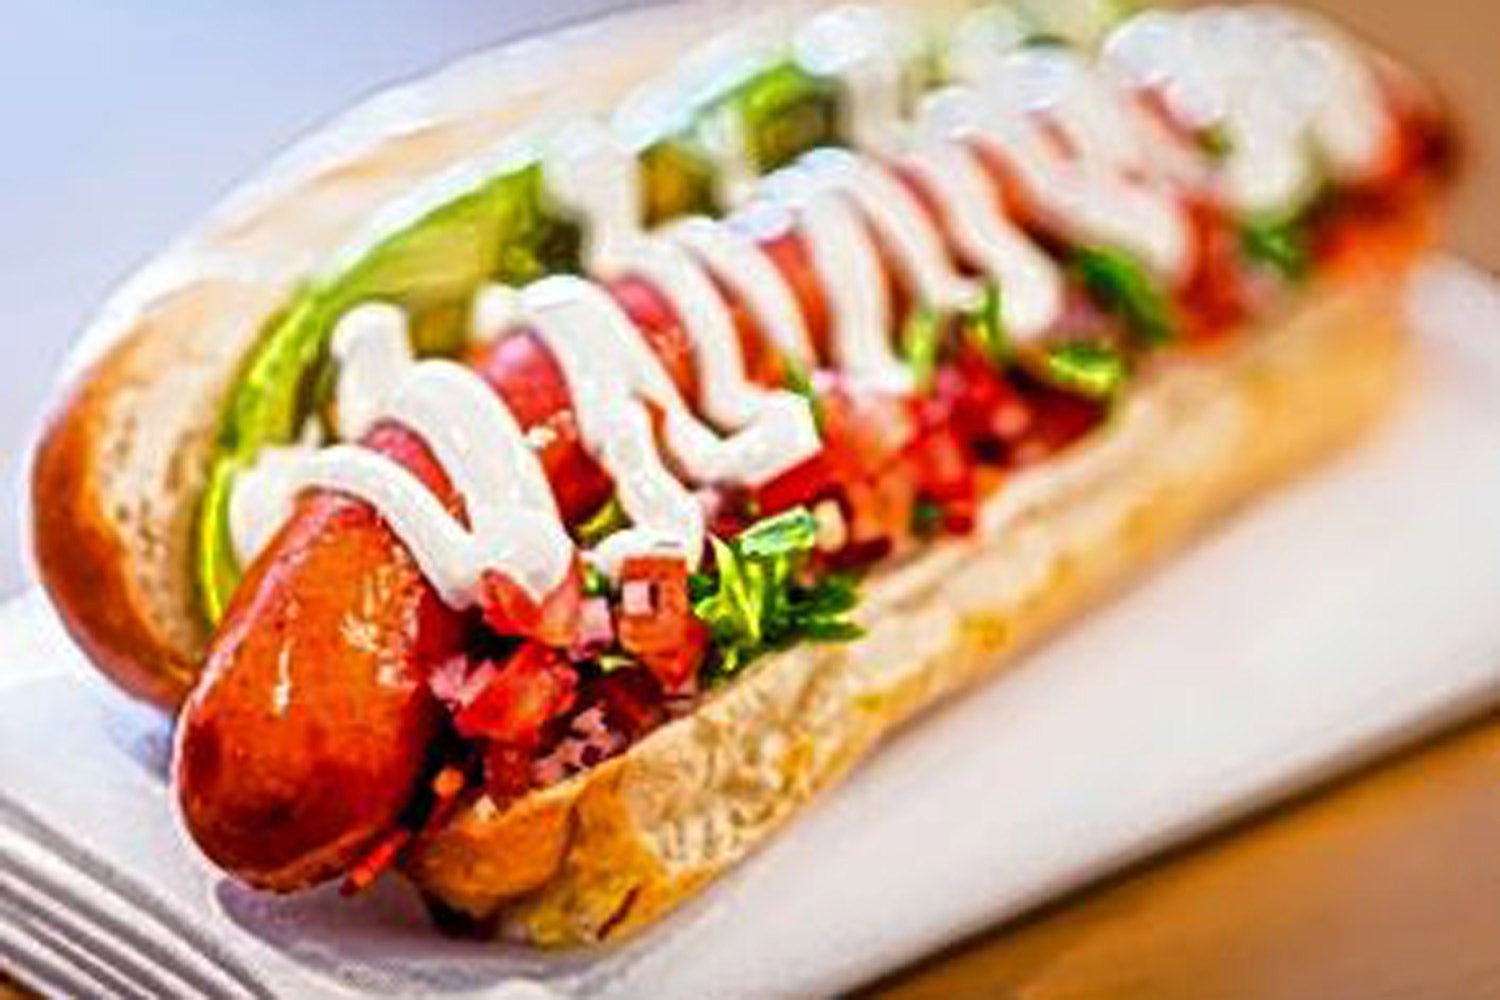 Billy'S Gourmet Hot Dogs
 The wurst can happen… boom in the gourmet hot dog trend